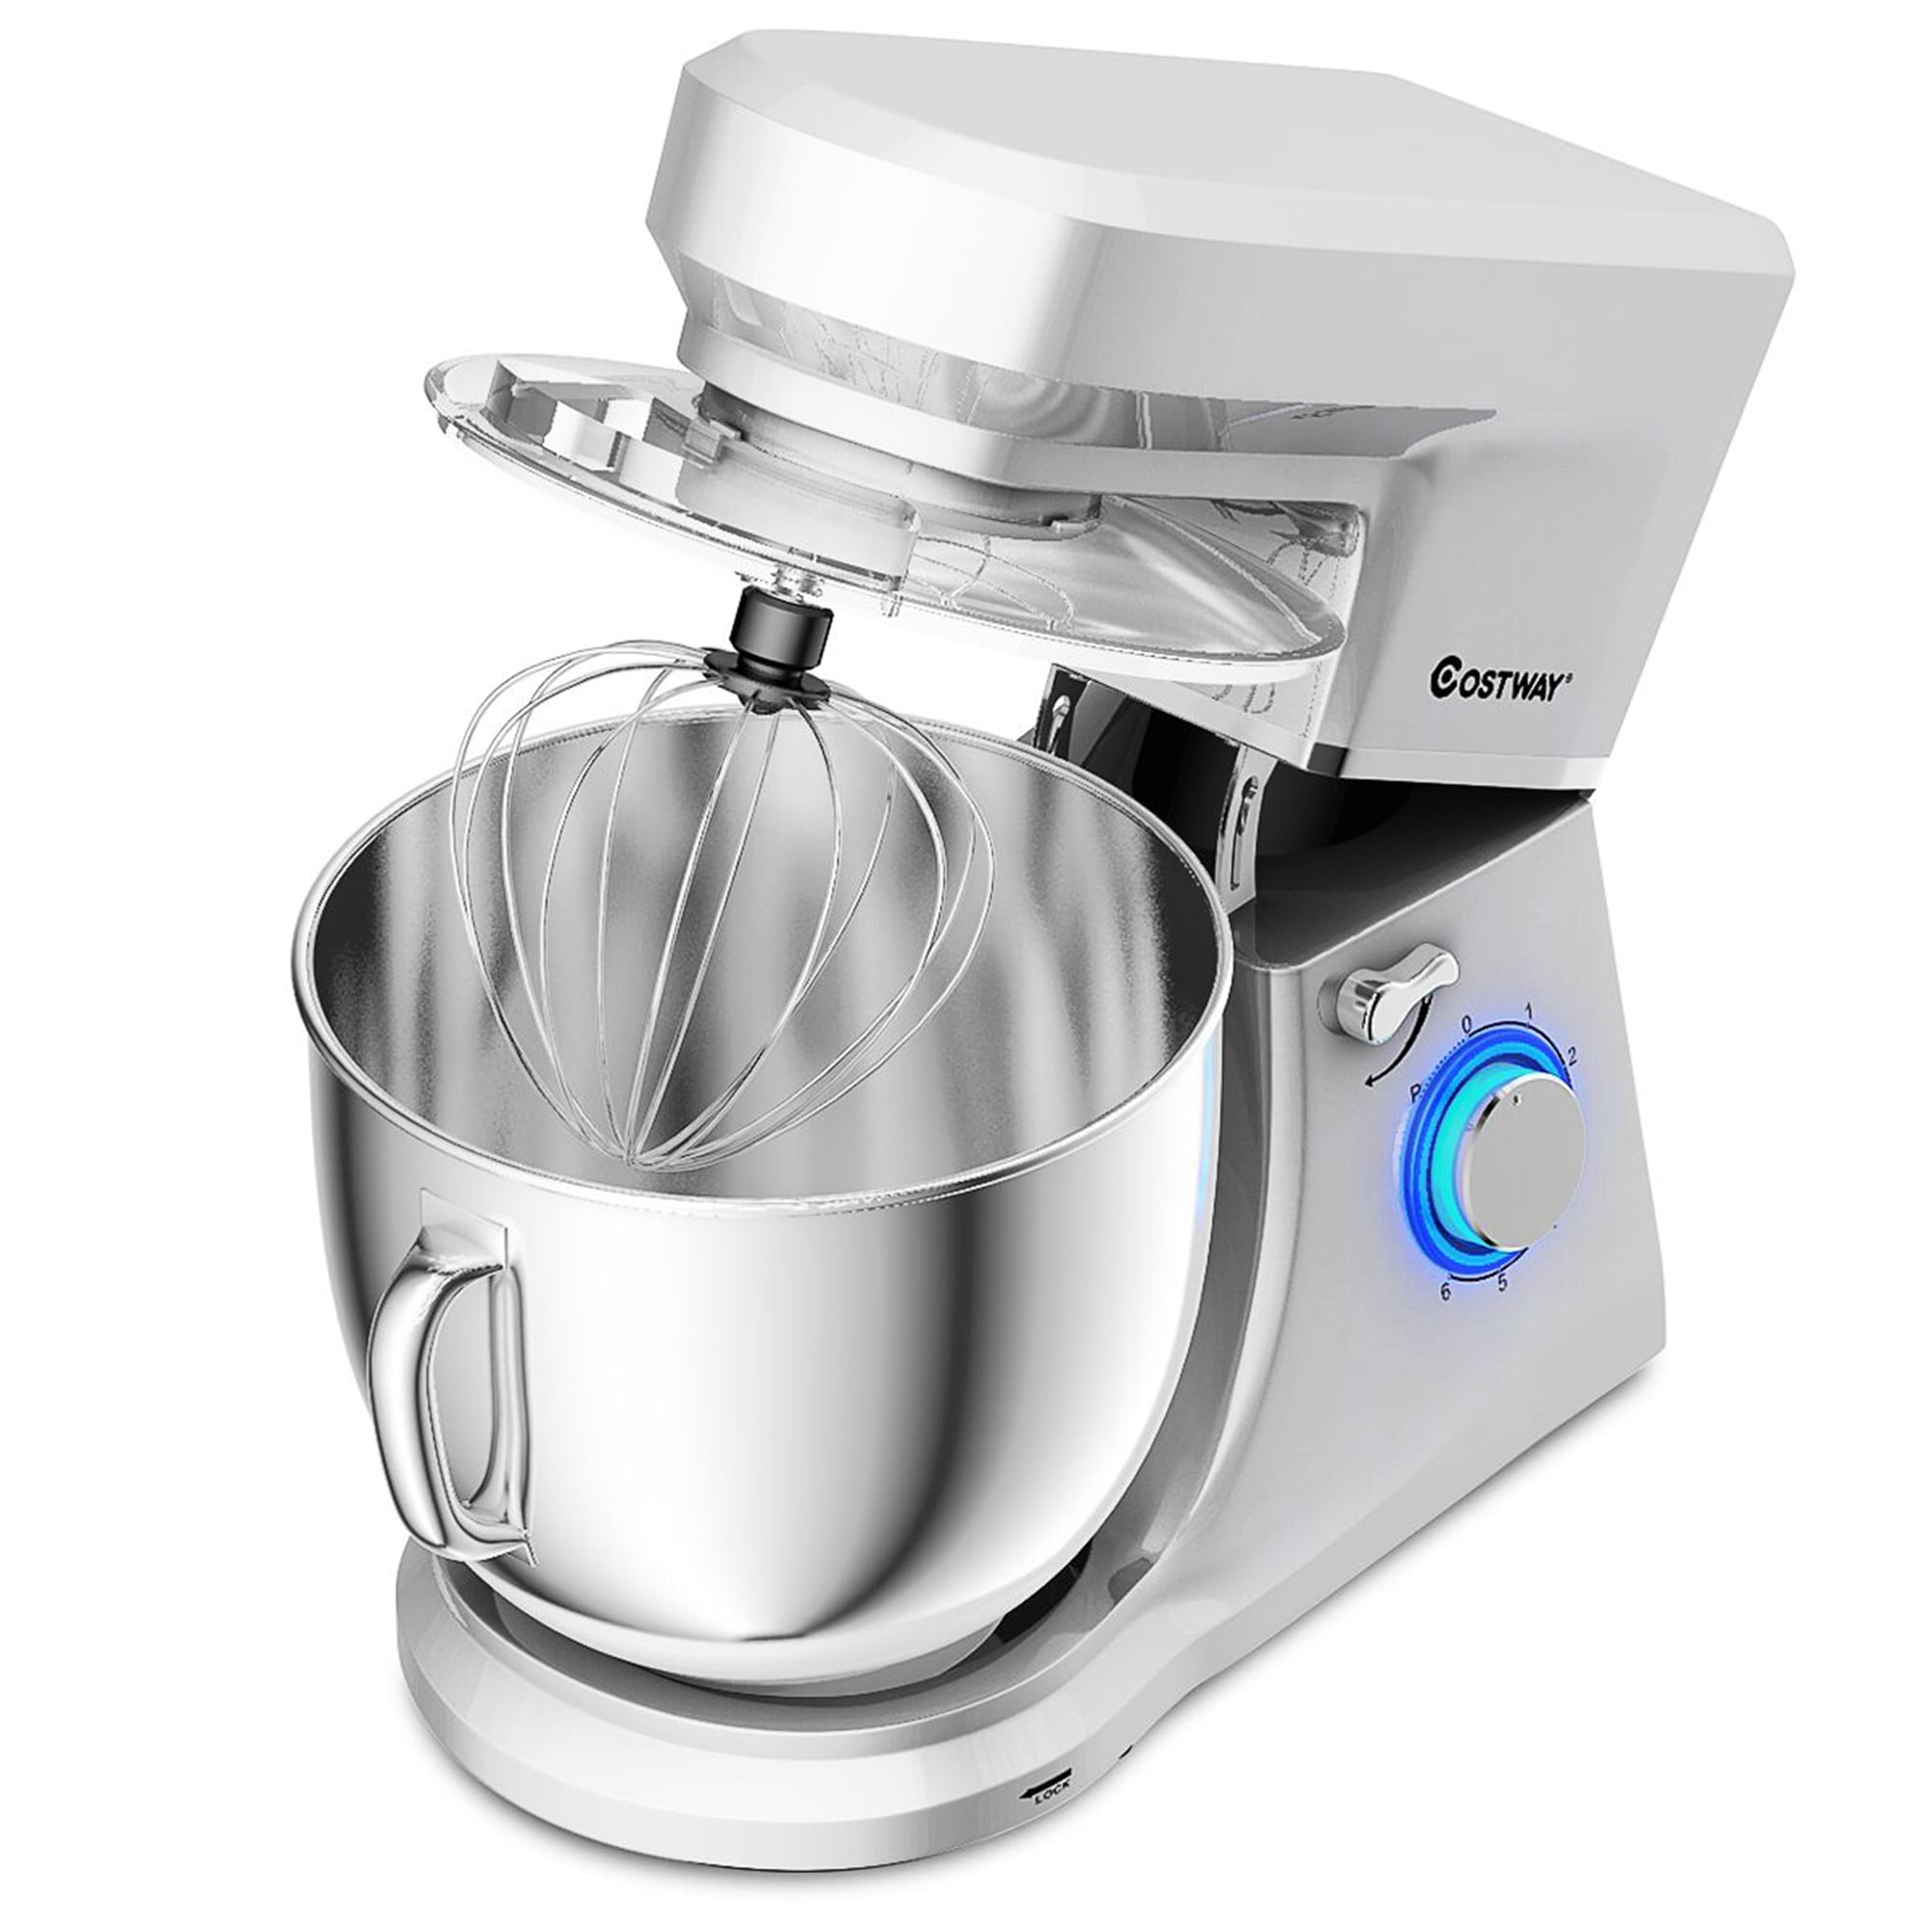 https://ak1.ostkcdn.com/images/products/is/images/direct/ba67e39425faaf44f463c2abc373596c3235d352/Stand-Mixer-7.5-Qt-6-Speed-Tilt-Head-Electric-Mixer-with-Beater.jpg